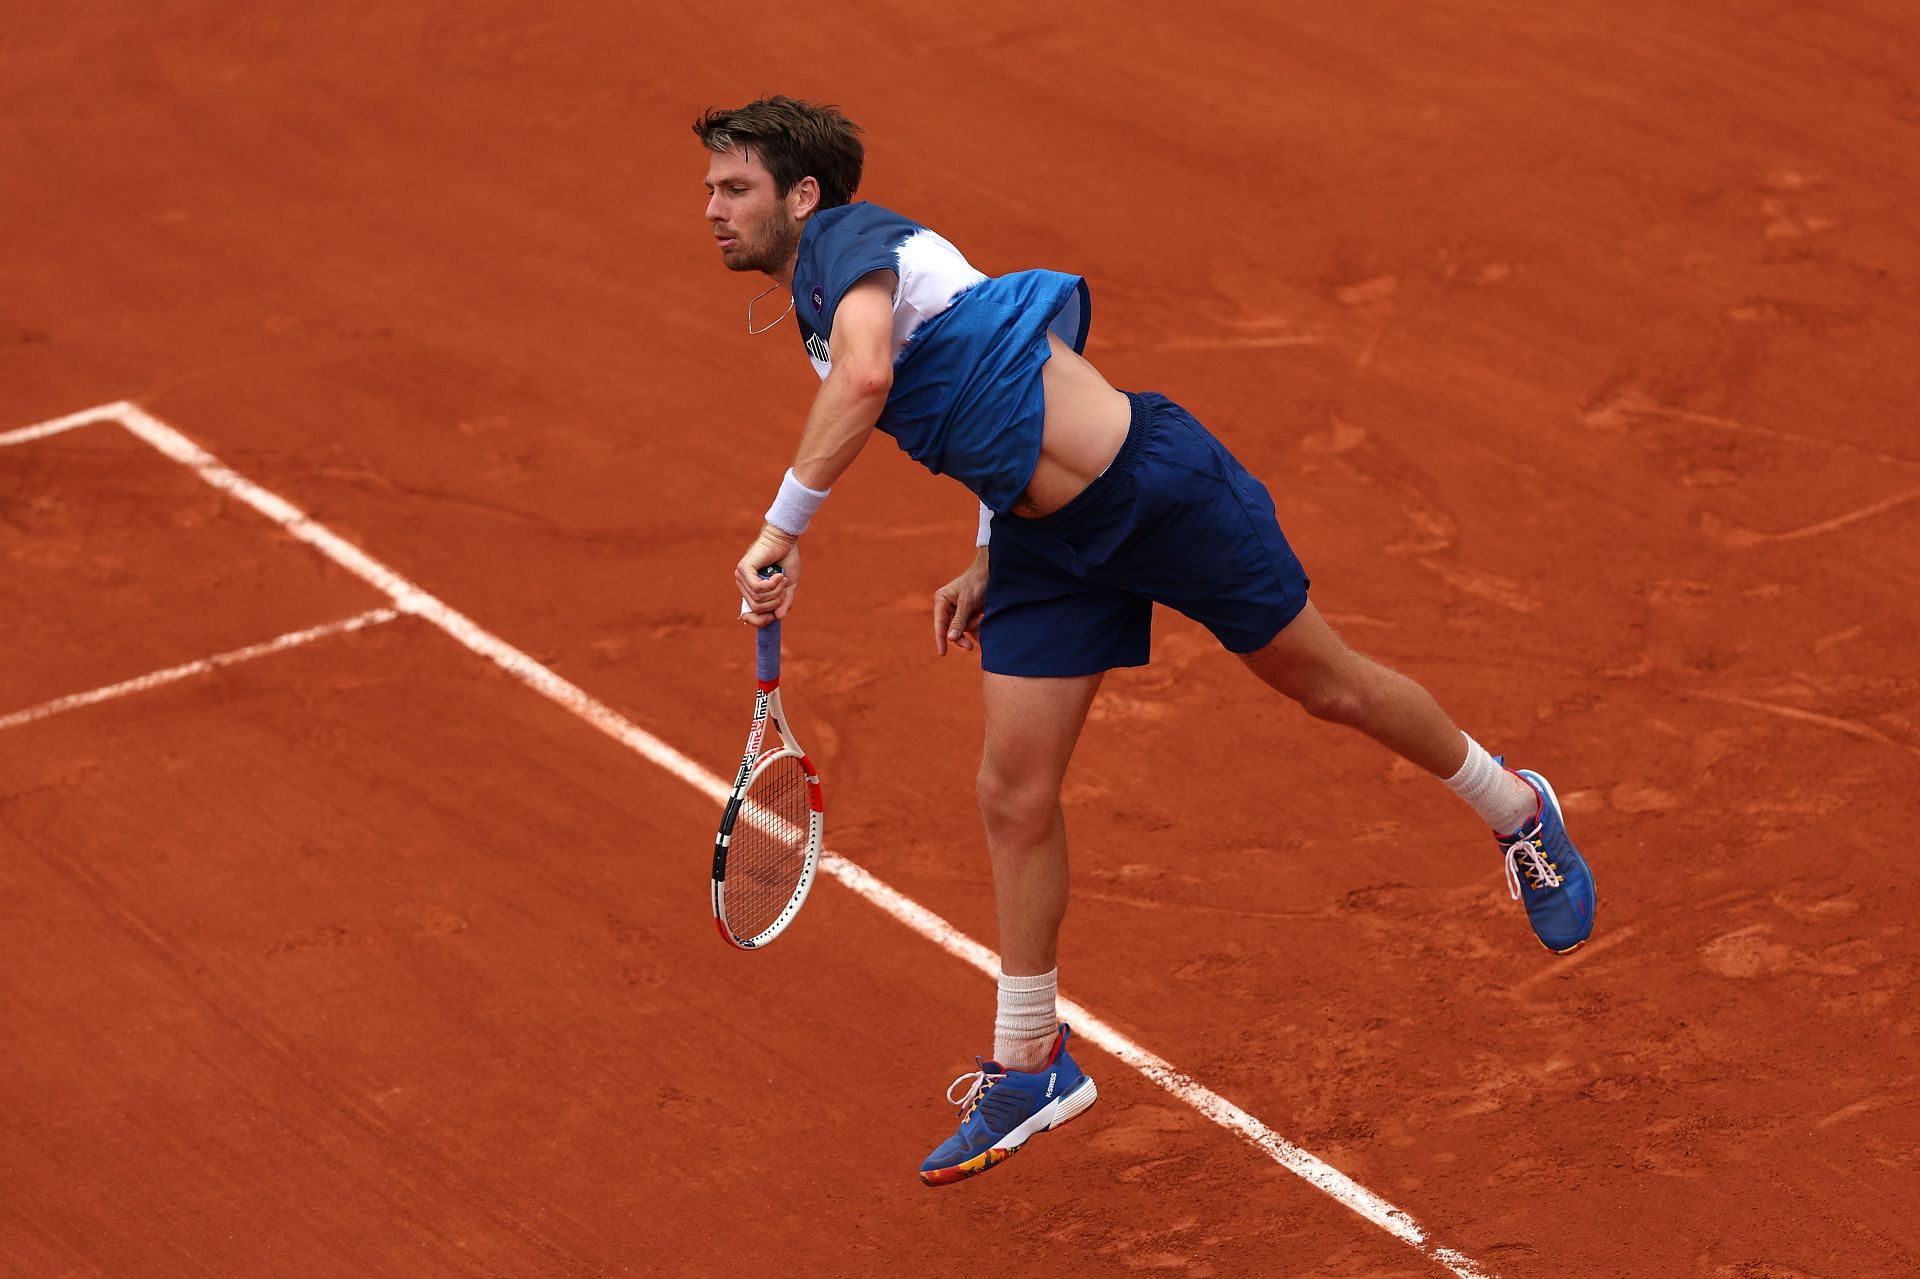 Cameron Norrie at the 2022 French Open